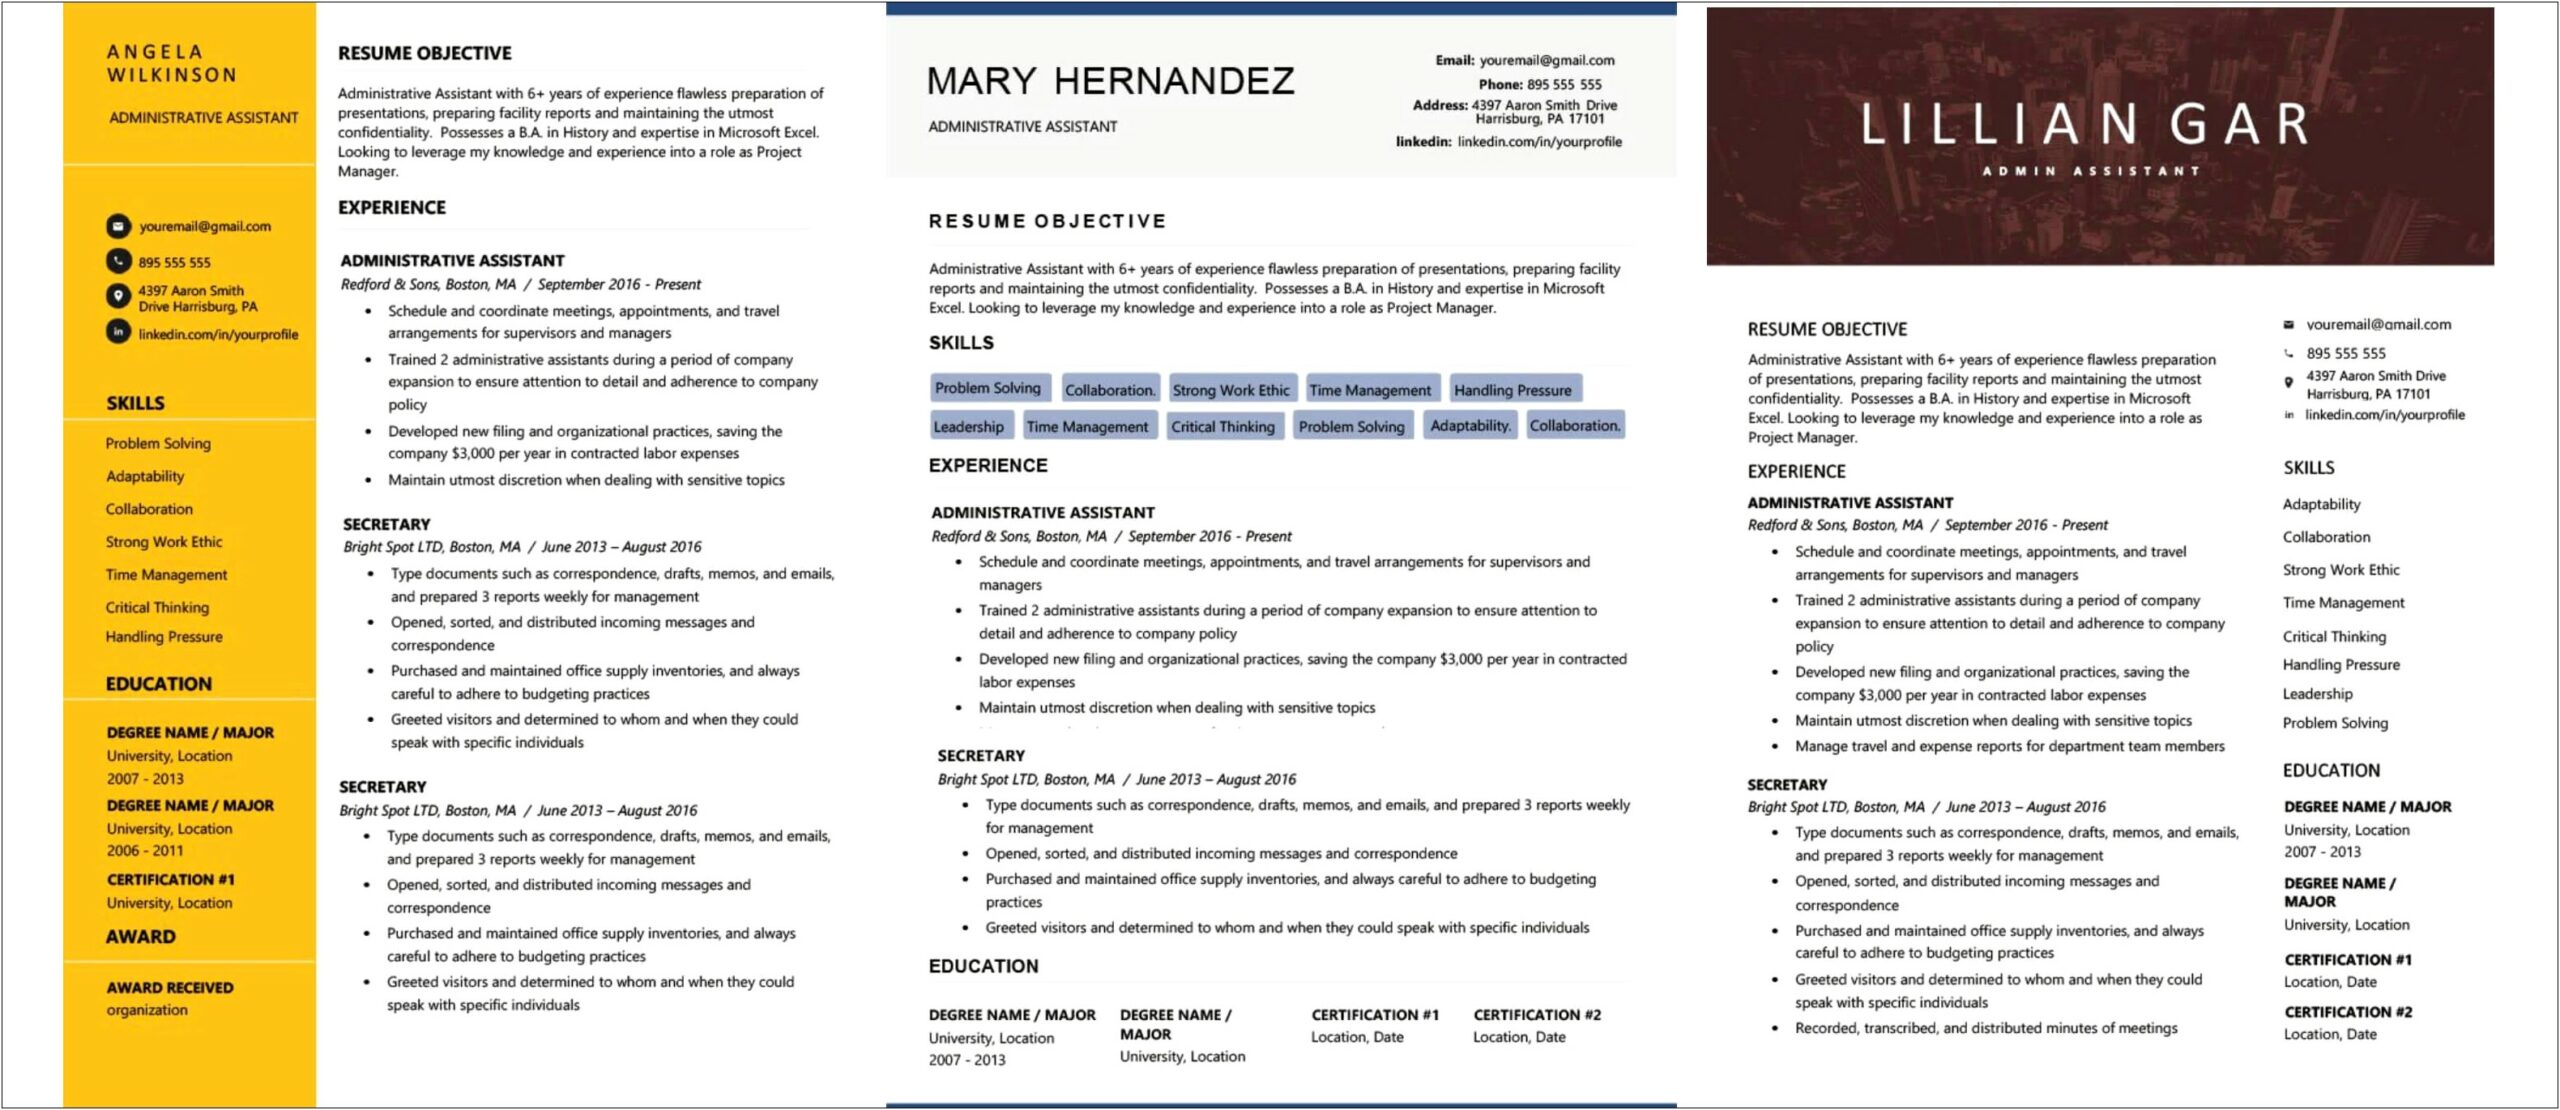 Examples Of Adaptability On Resume